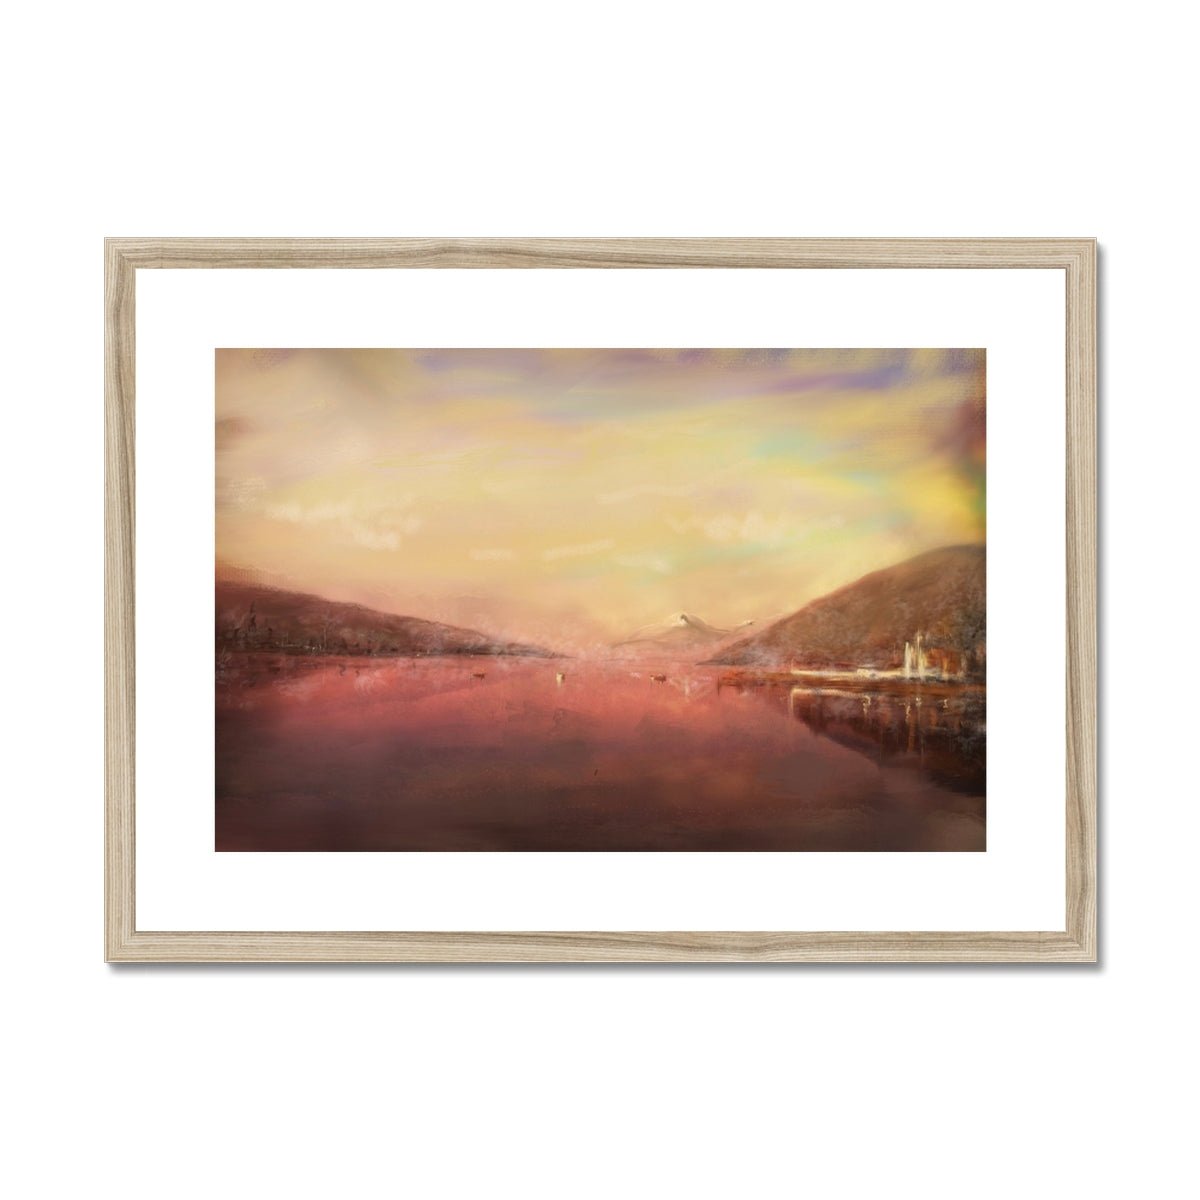 Loch Tay Painting | Framed & Mounted Prints From Scotland-Framed & Mounted Prints-Scottish Lochs & Mountains Art Gallery-A2 Landscape-Natural Frame-Paintings, Prints, Homeware, Art Gifts From Scotland By Scottish Artist Kevin Hunter